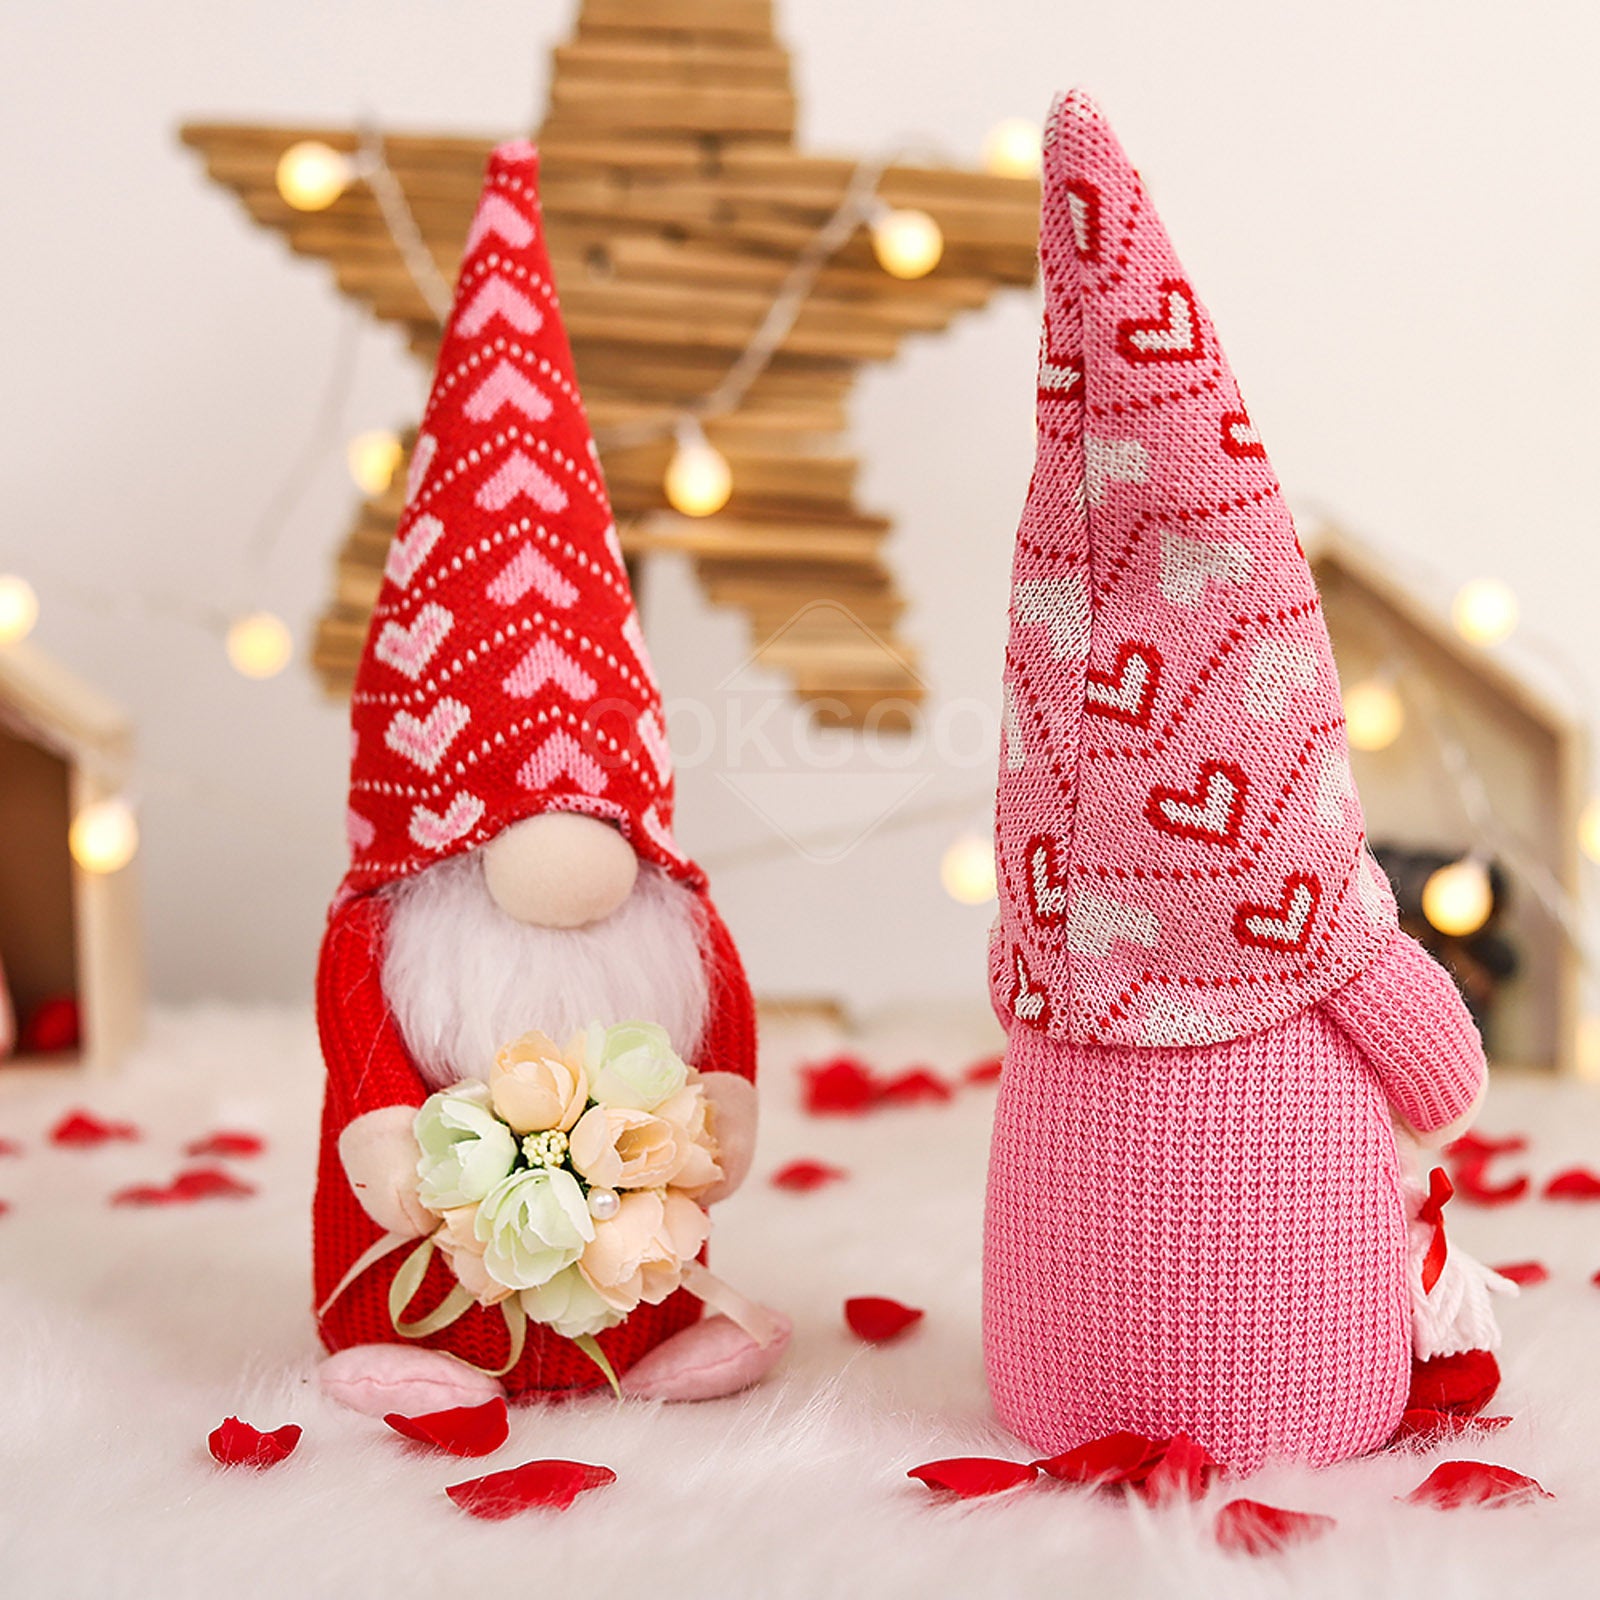 Forever Love - Adorable Gnome Couple Holding Tulip And Heart